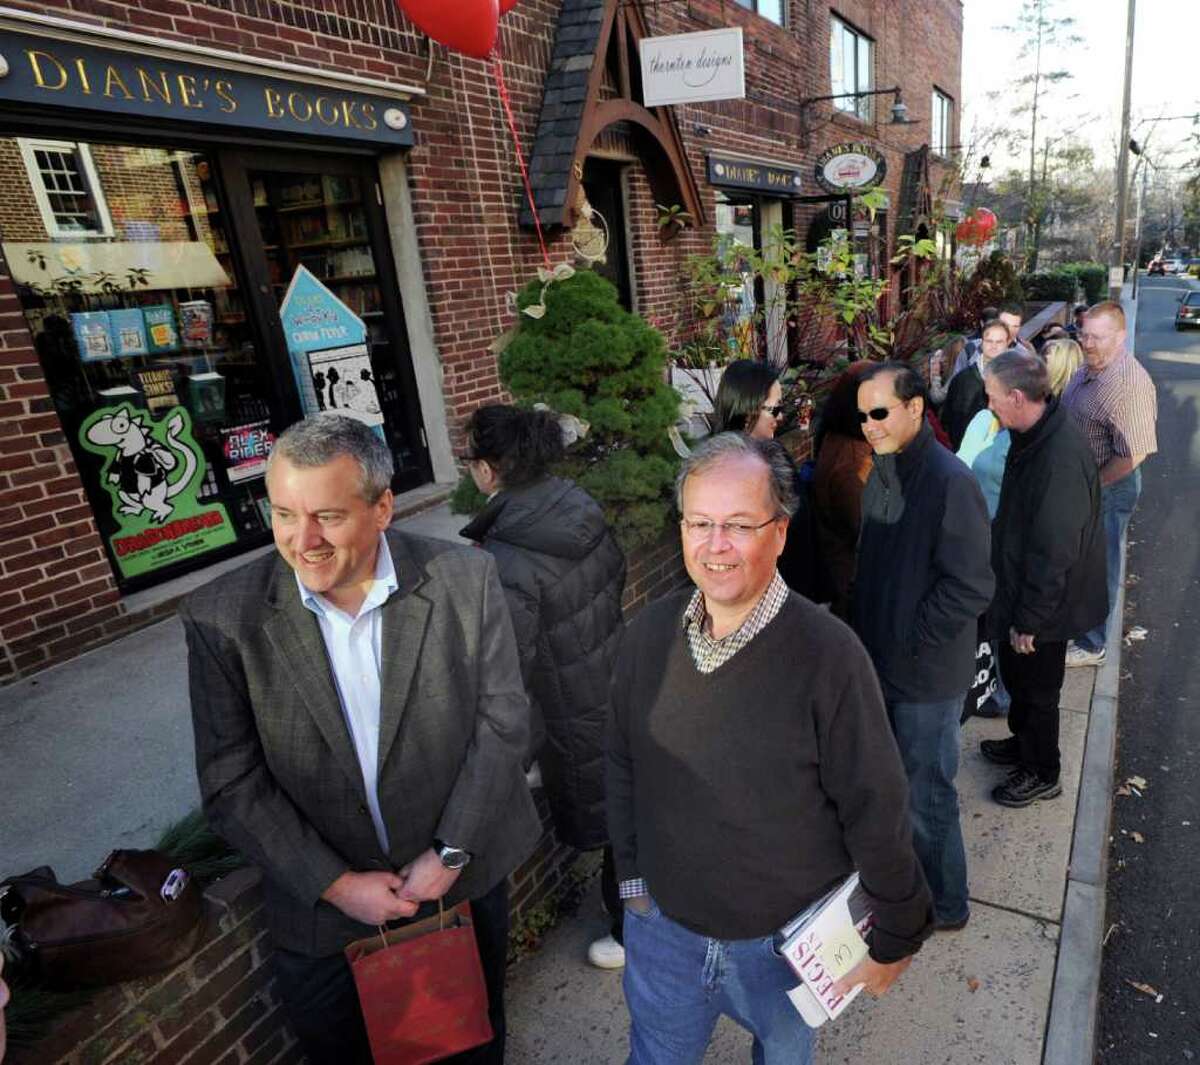 At left, Steve Schroeder, of Redding, Pa., and Greenwich resident Frank D'Angelo, right, wait in line to meet Greenwich resident Regis Philbin during a book-signing by Philbin at Diane's Books in Greenwich, Saturday afternoon, Dec. 3, 2011. Philbin was at the store to promote his new memoir, "How I Got This Way."